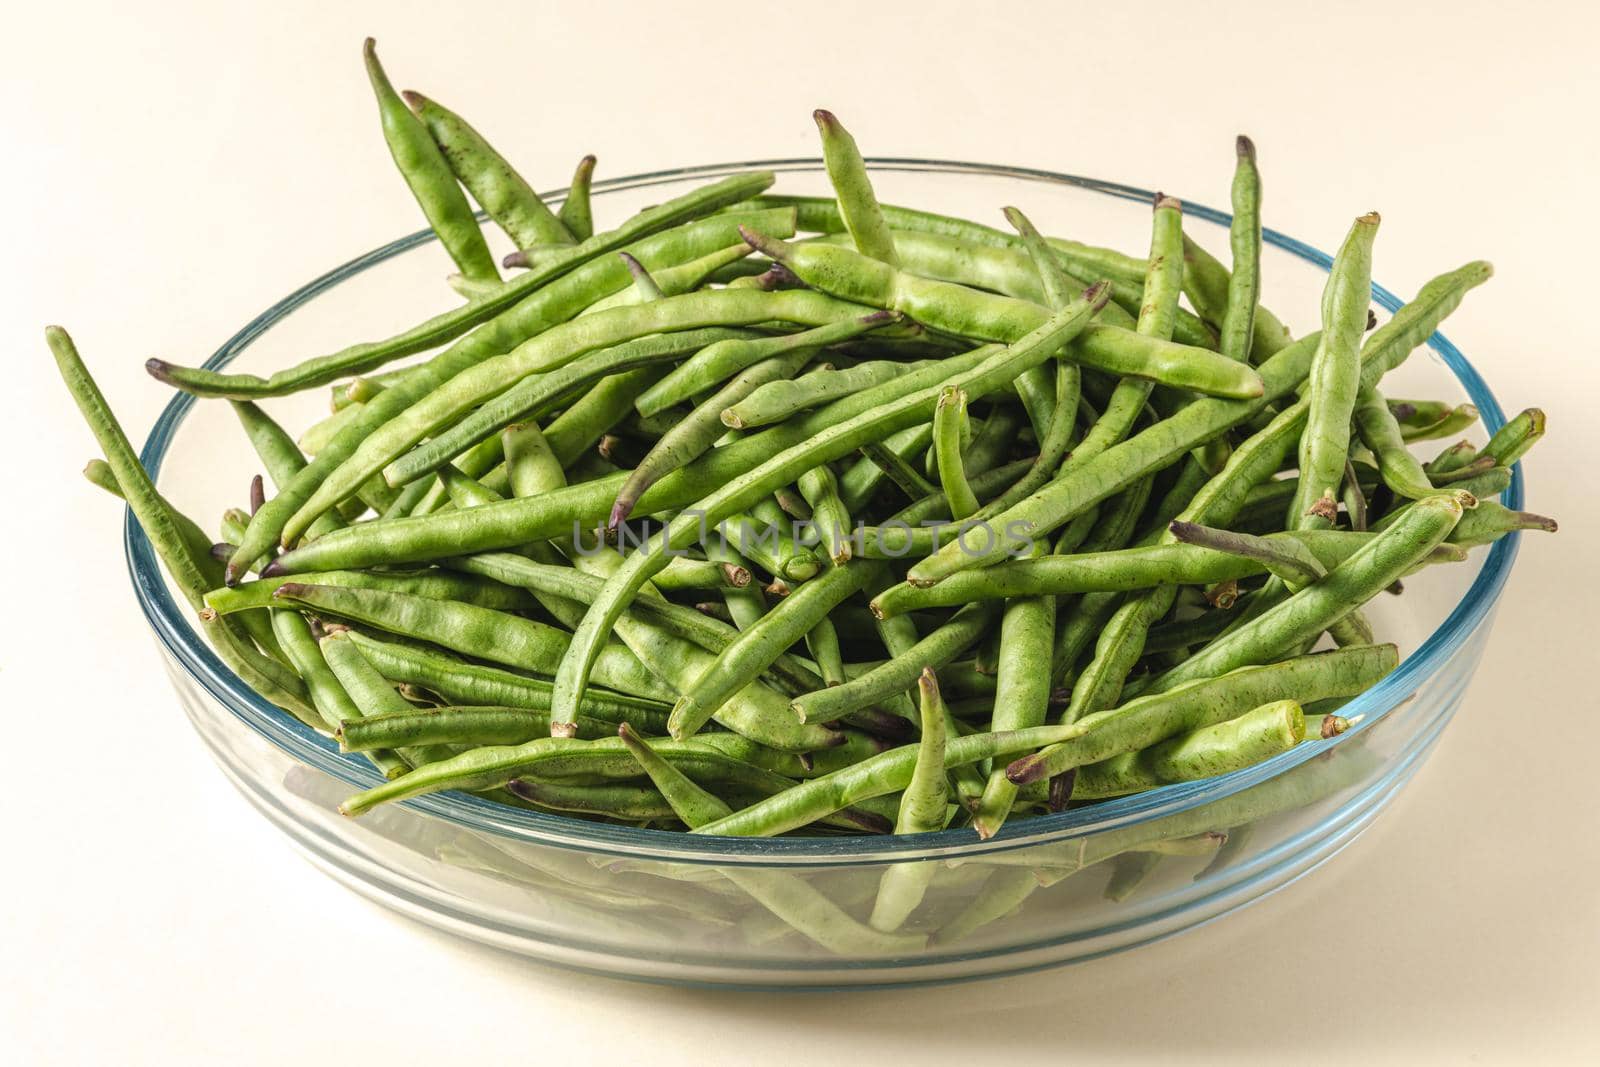 Fresh green beans in a glass bowl. Healthy eating concept